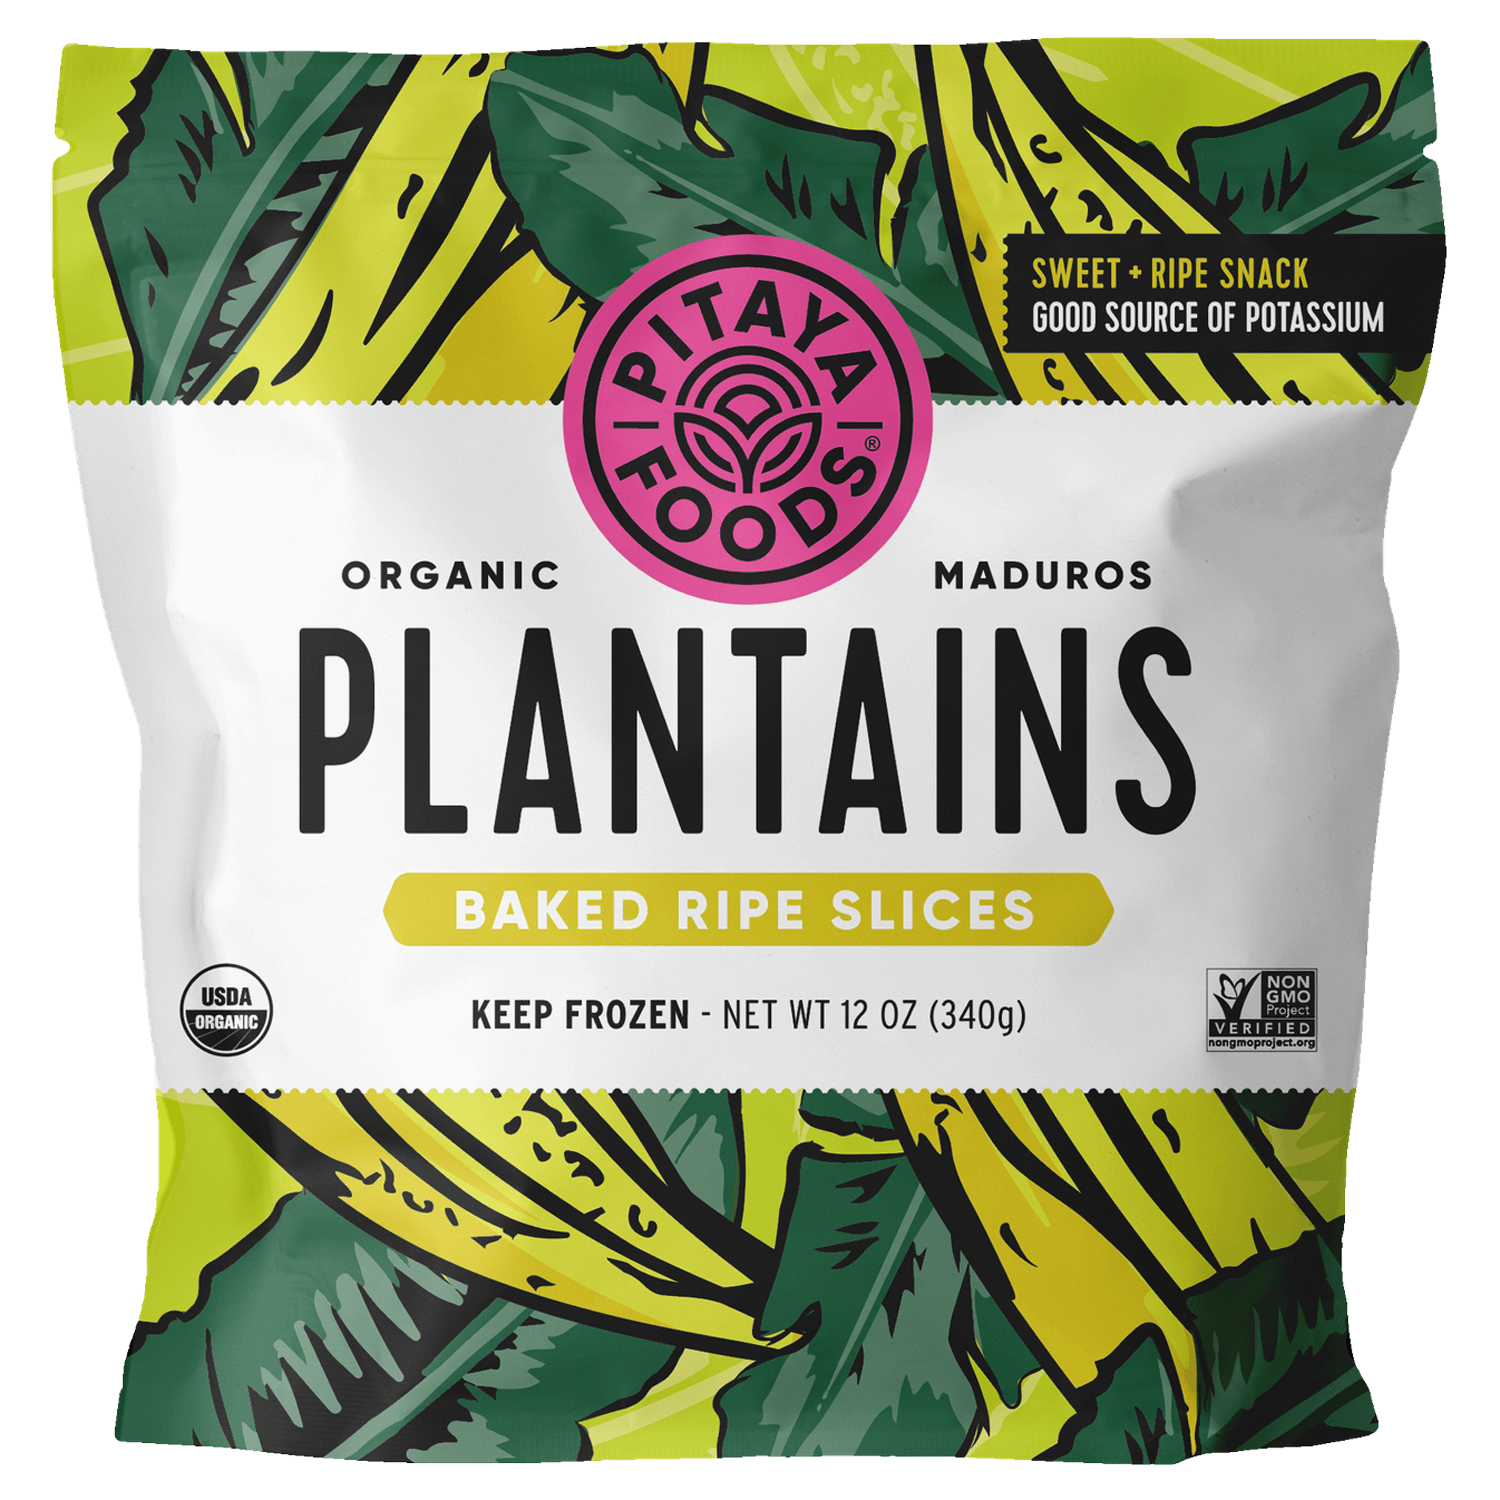 Organic Plantains Baked Ripe Slices Case